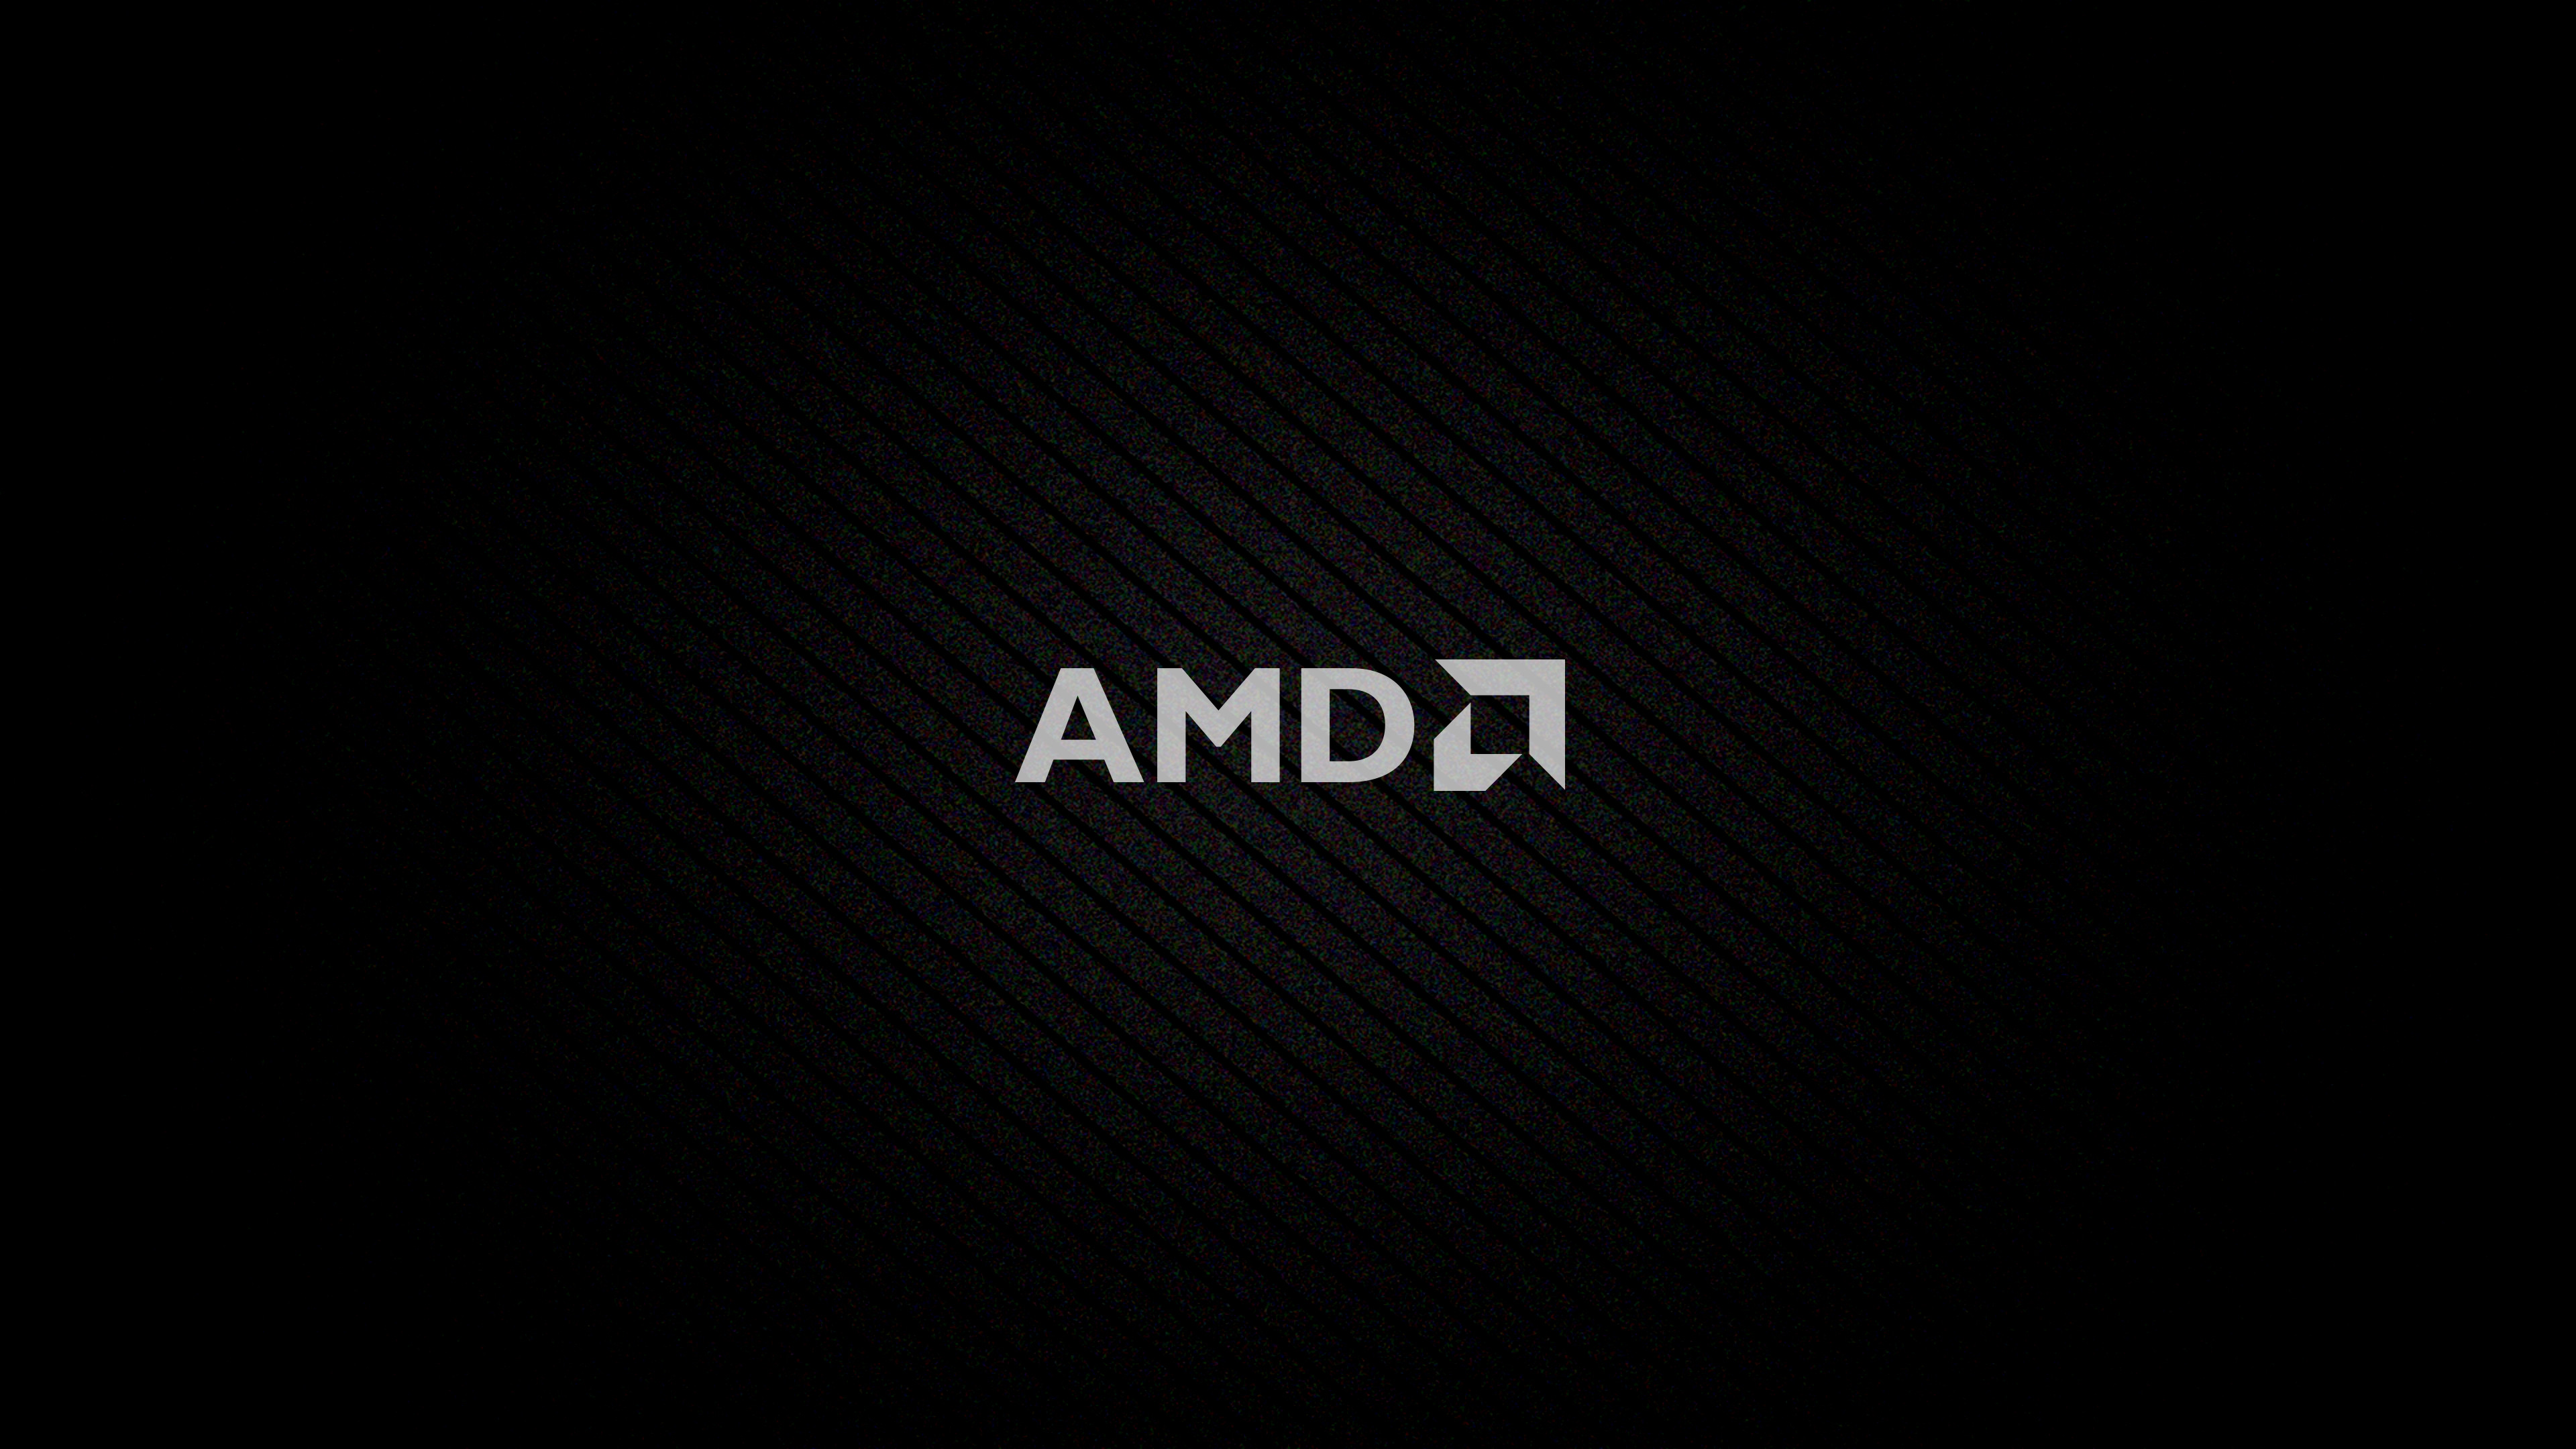 3840x2160 any modifications to be made to these wallpapers or for wallpapers .